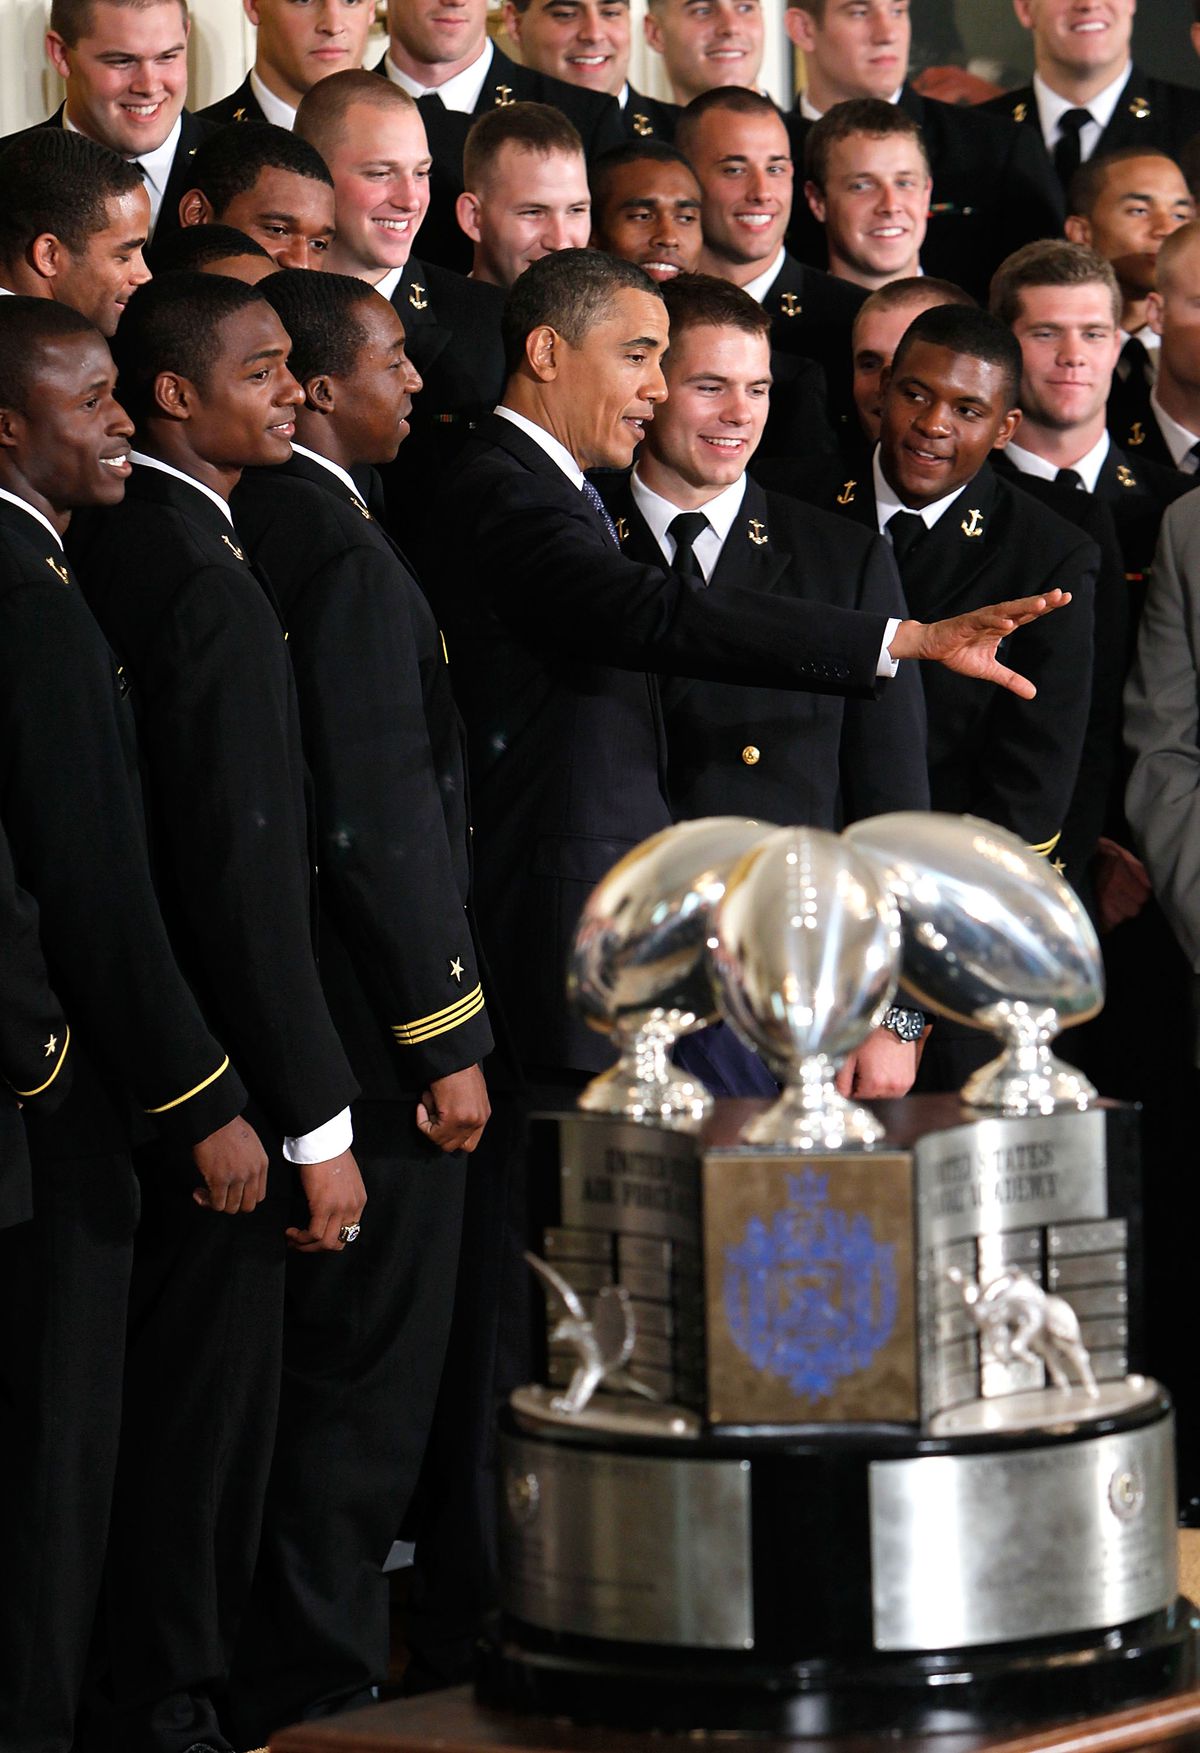 Obama Presents Commander In Chief Trophy To U.S. Naval Academy